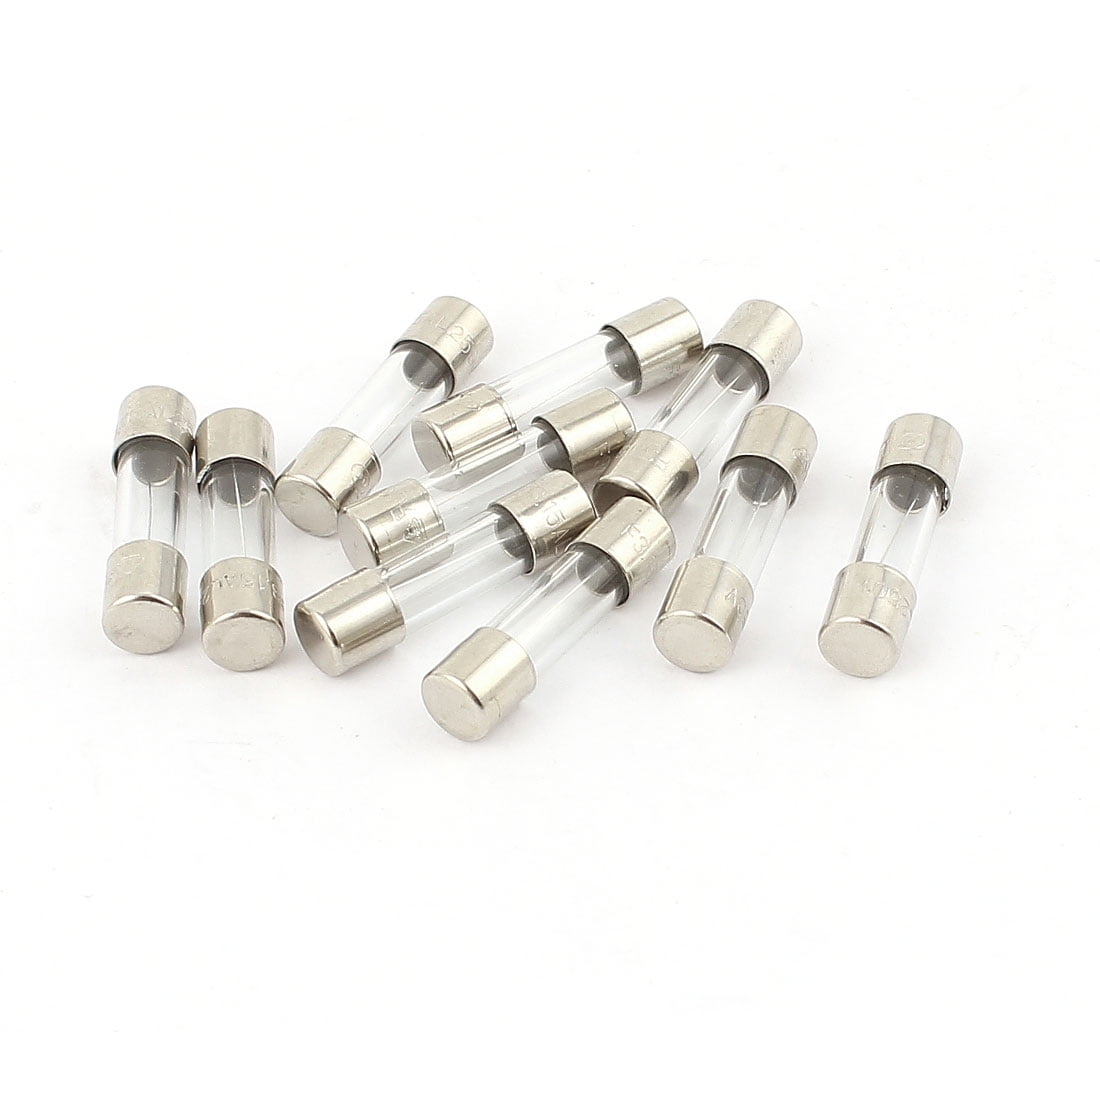 250V 12A 5mmx20mm Fast Blow Type Quick Glass Tube Fuses 100Pcs 